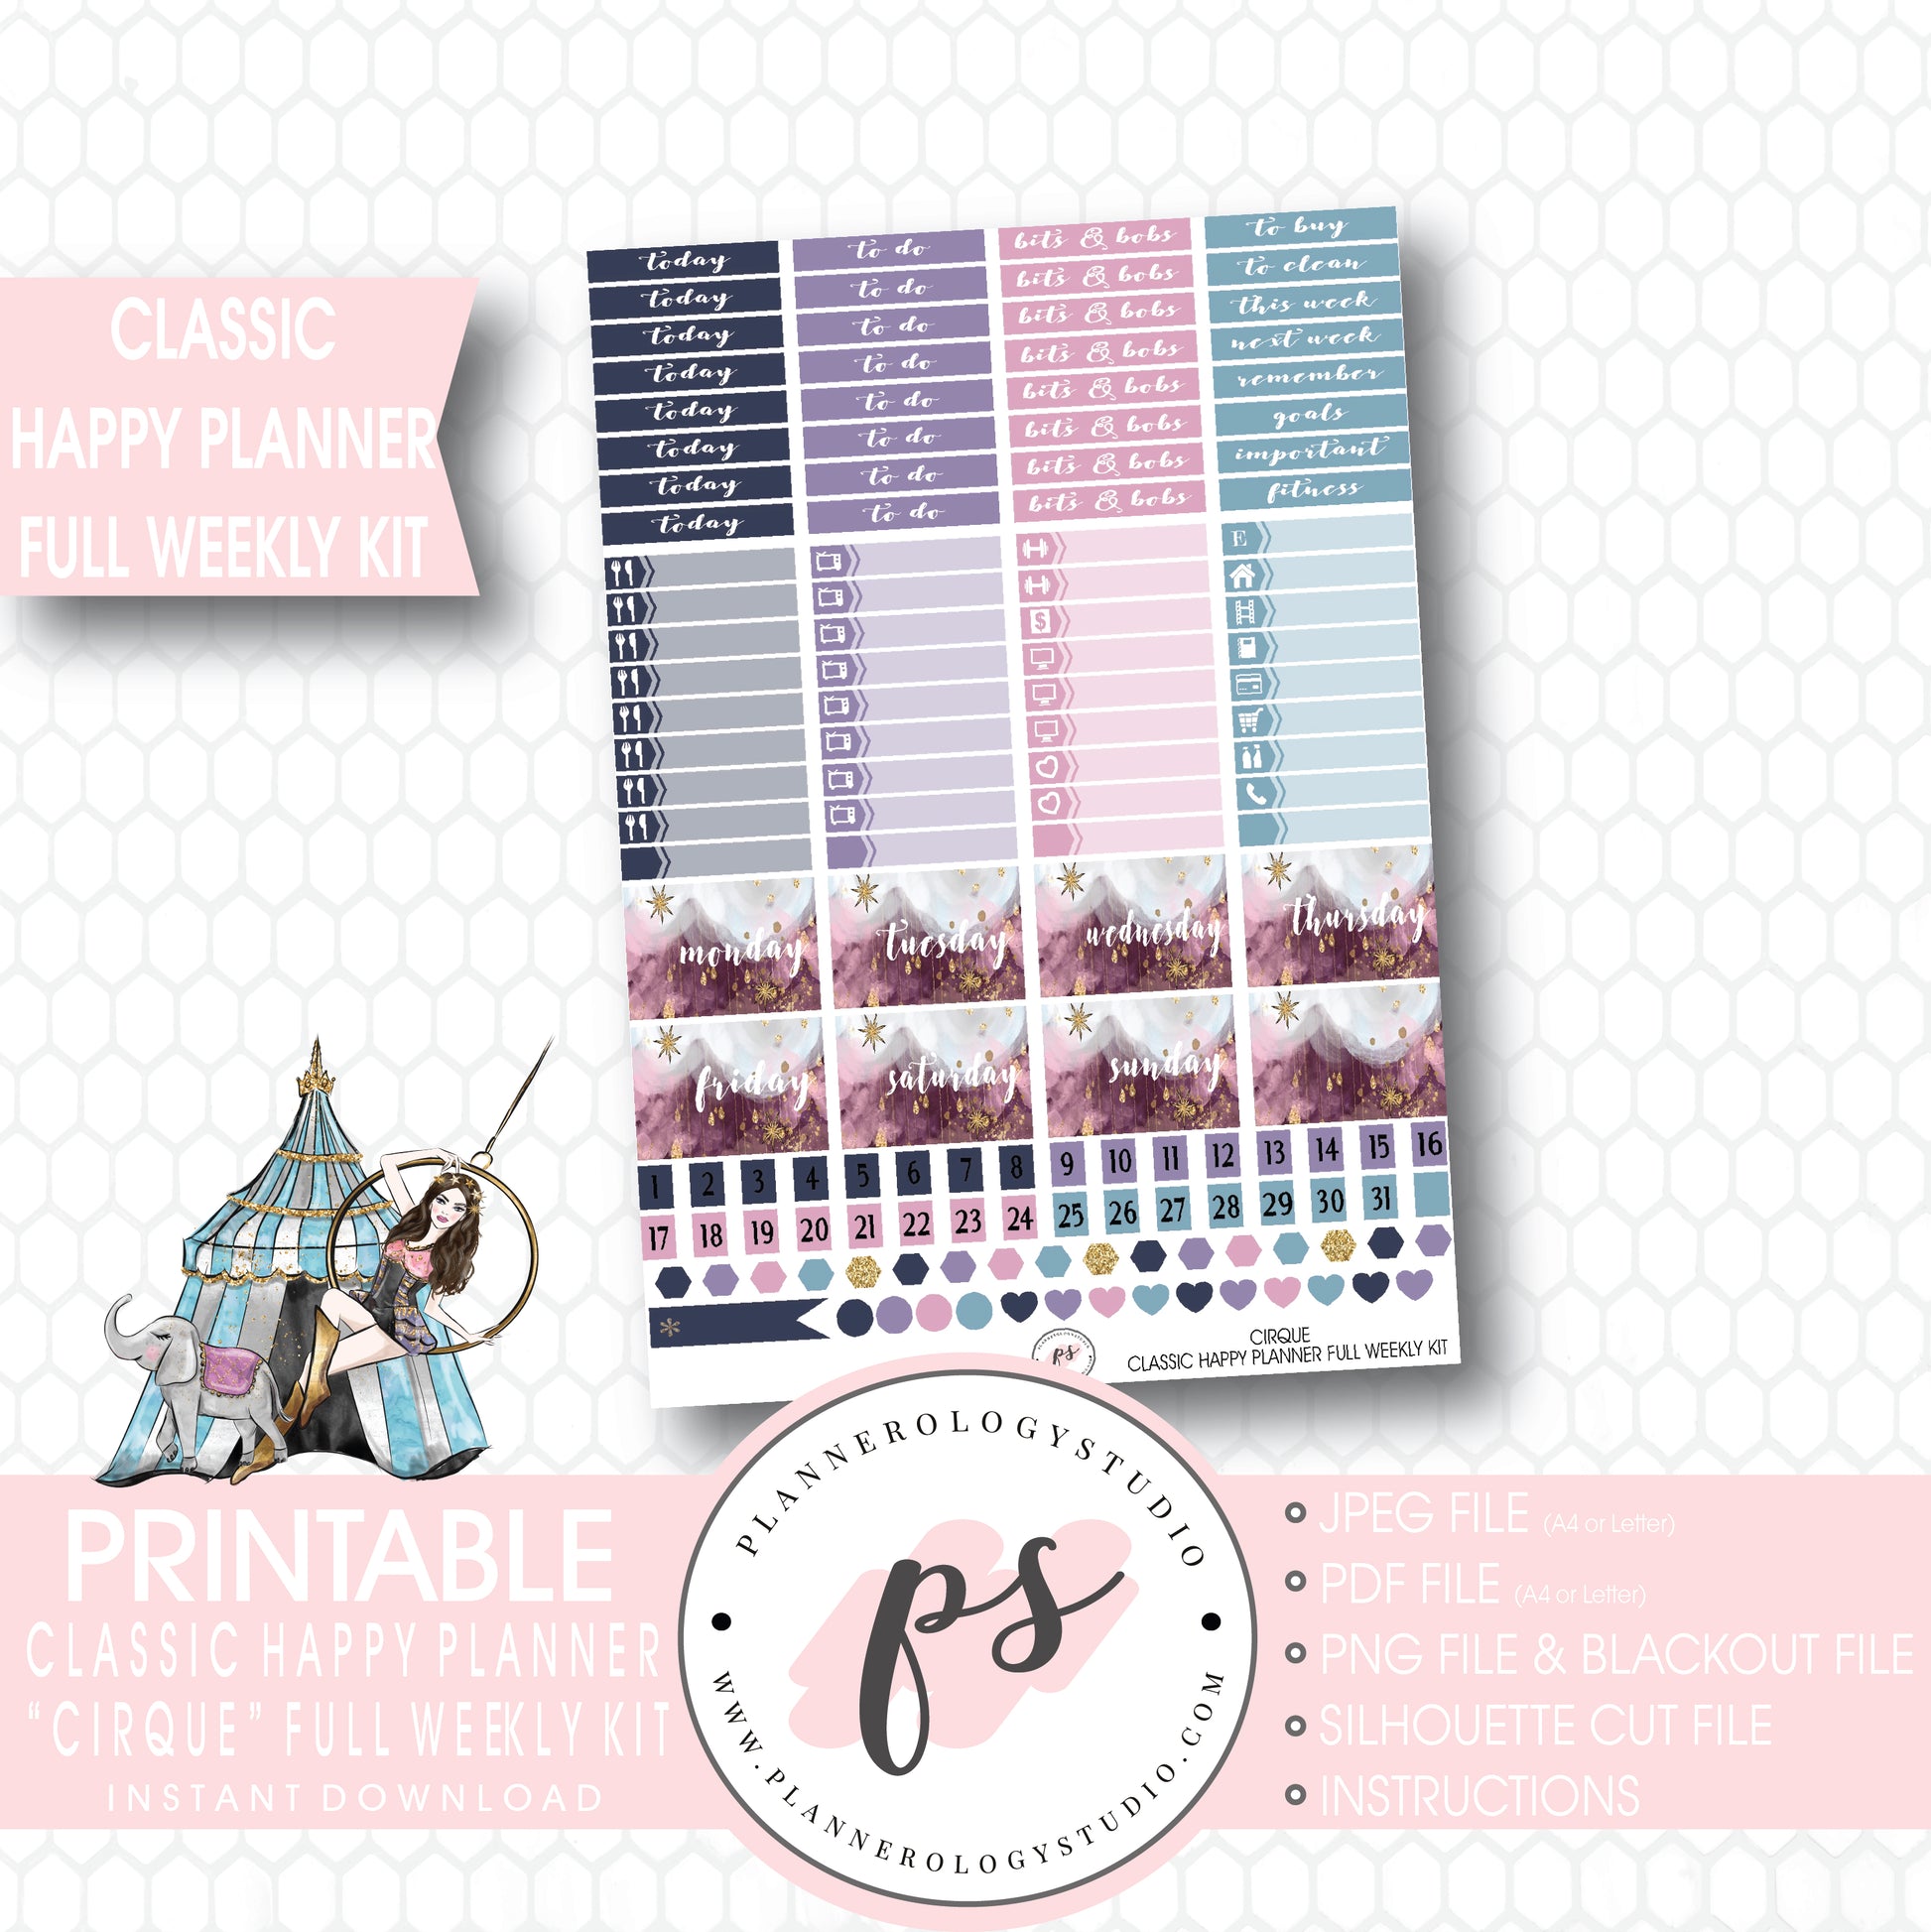 Cirque Full Weekly Kit Printable Planner Stickers (for use with Classic Happy Planner) - Plannerologystudio